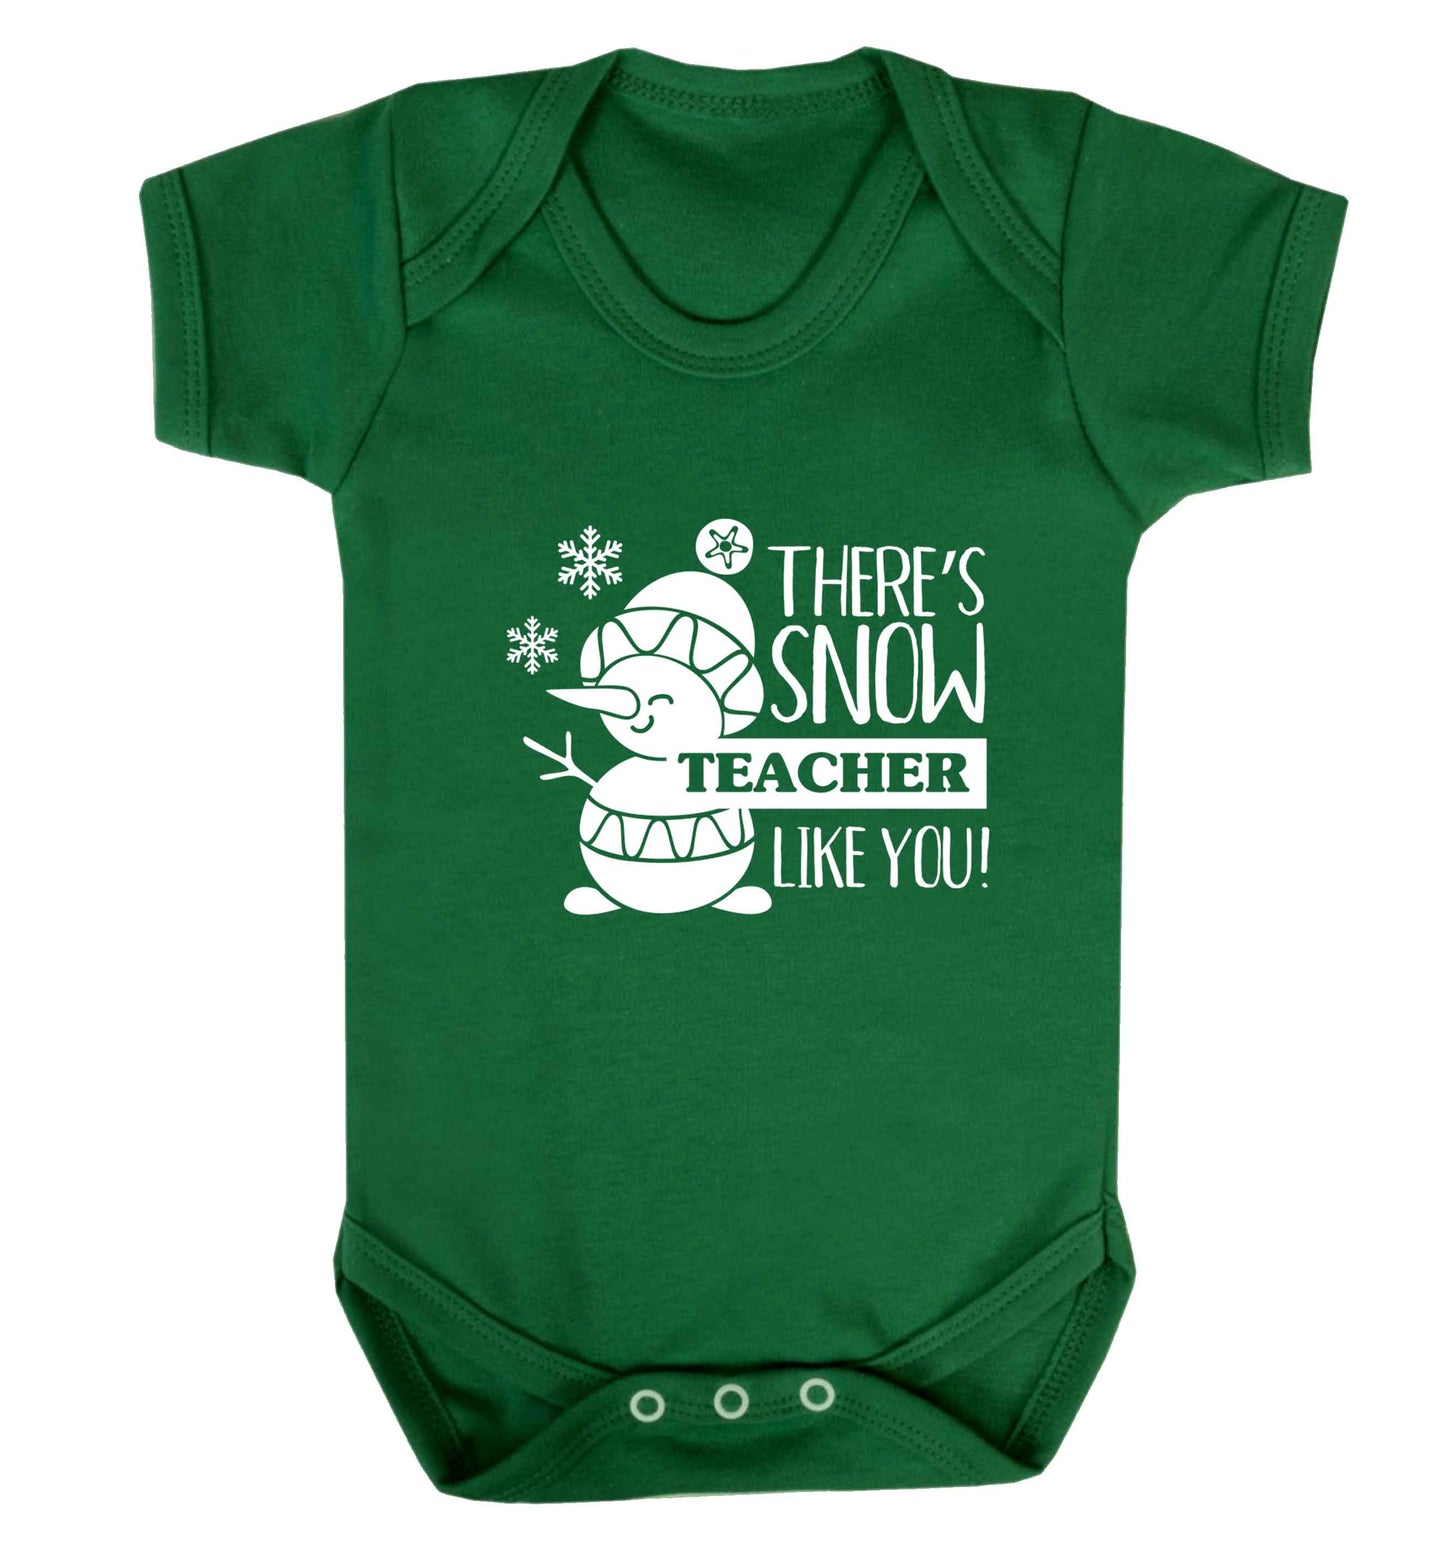 There's snow teacher like you baby vest green 18-24 months